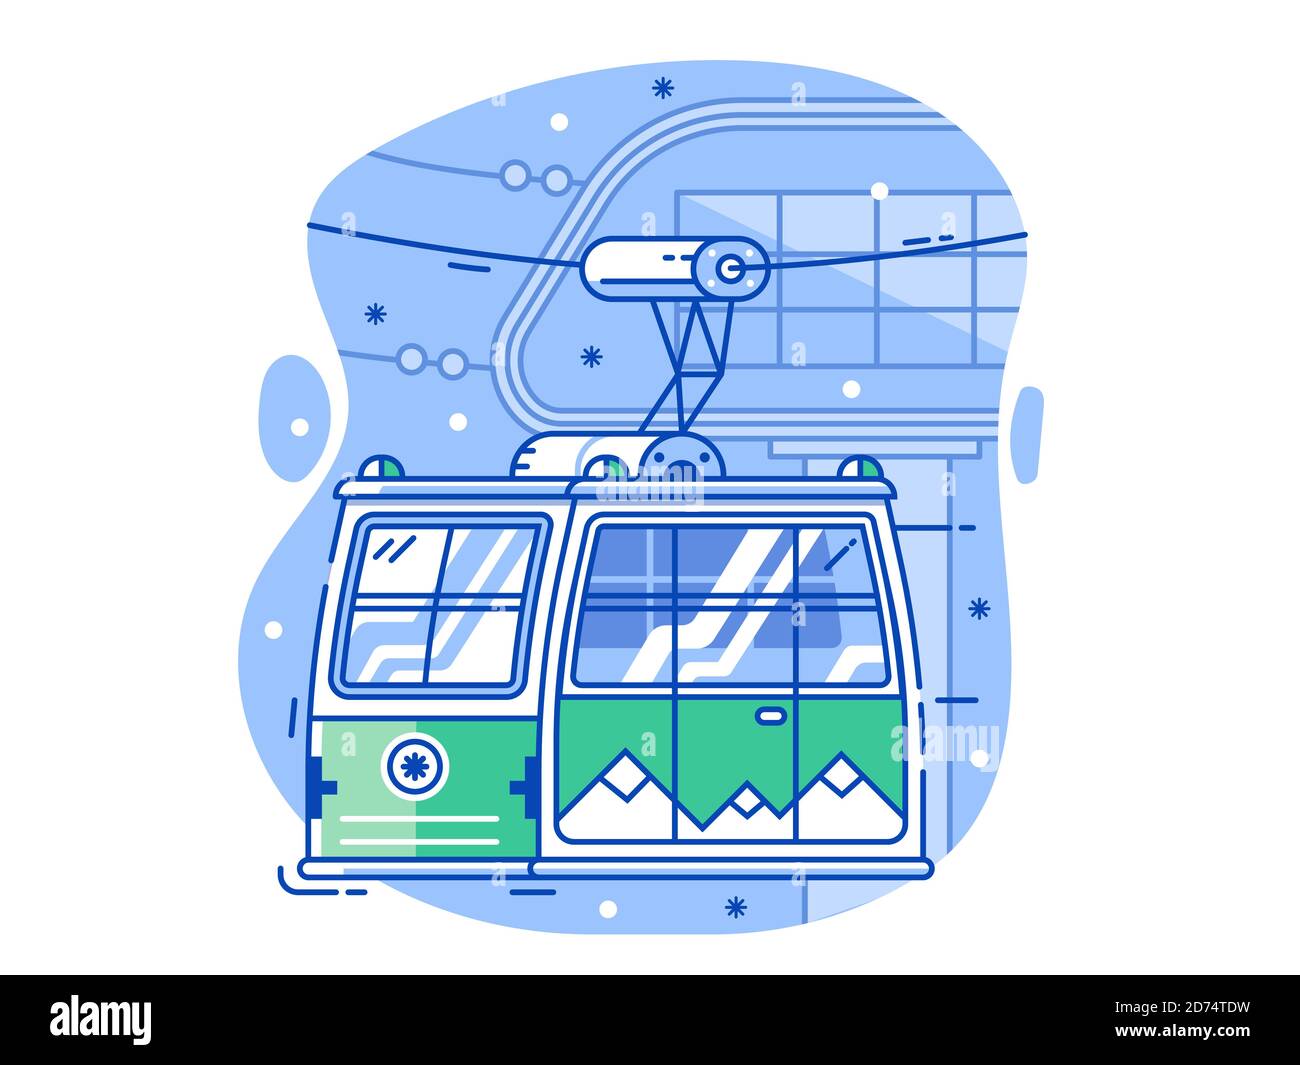 Ski Resort Line Concept with Green Cable Car Stock Vector